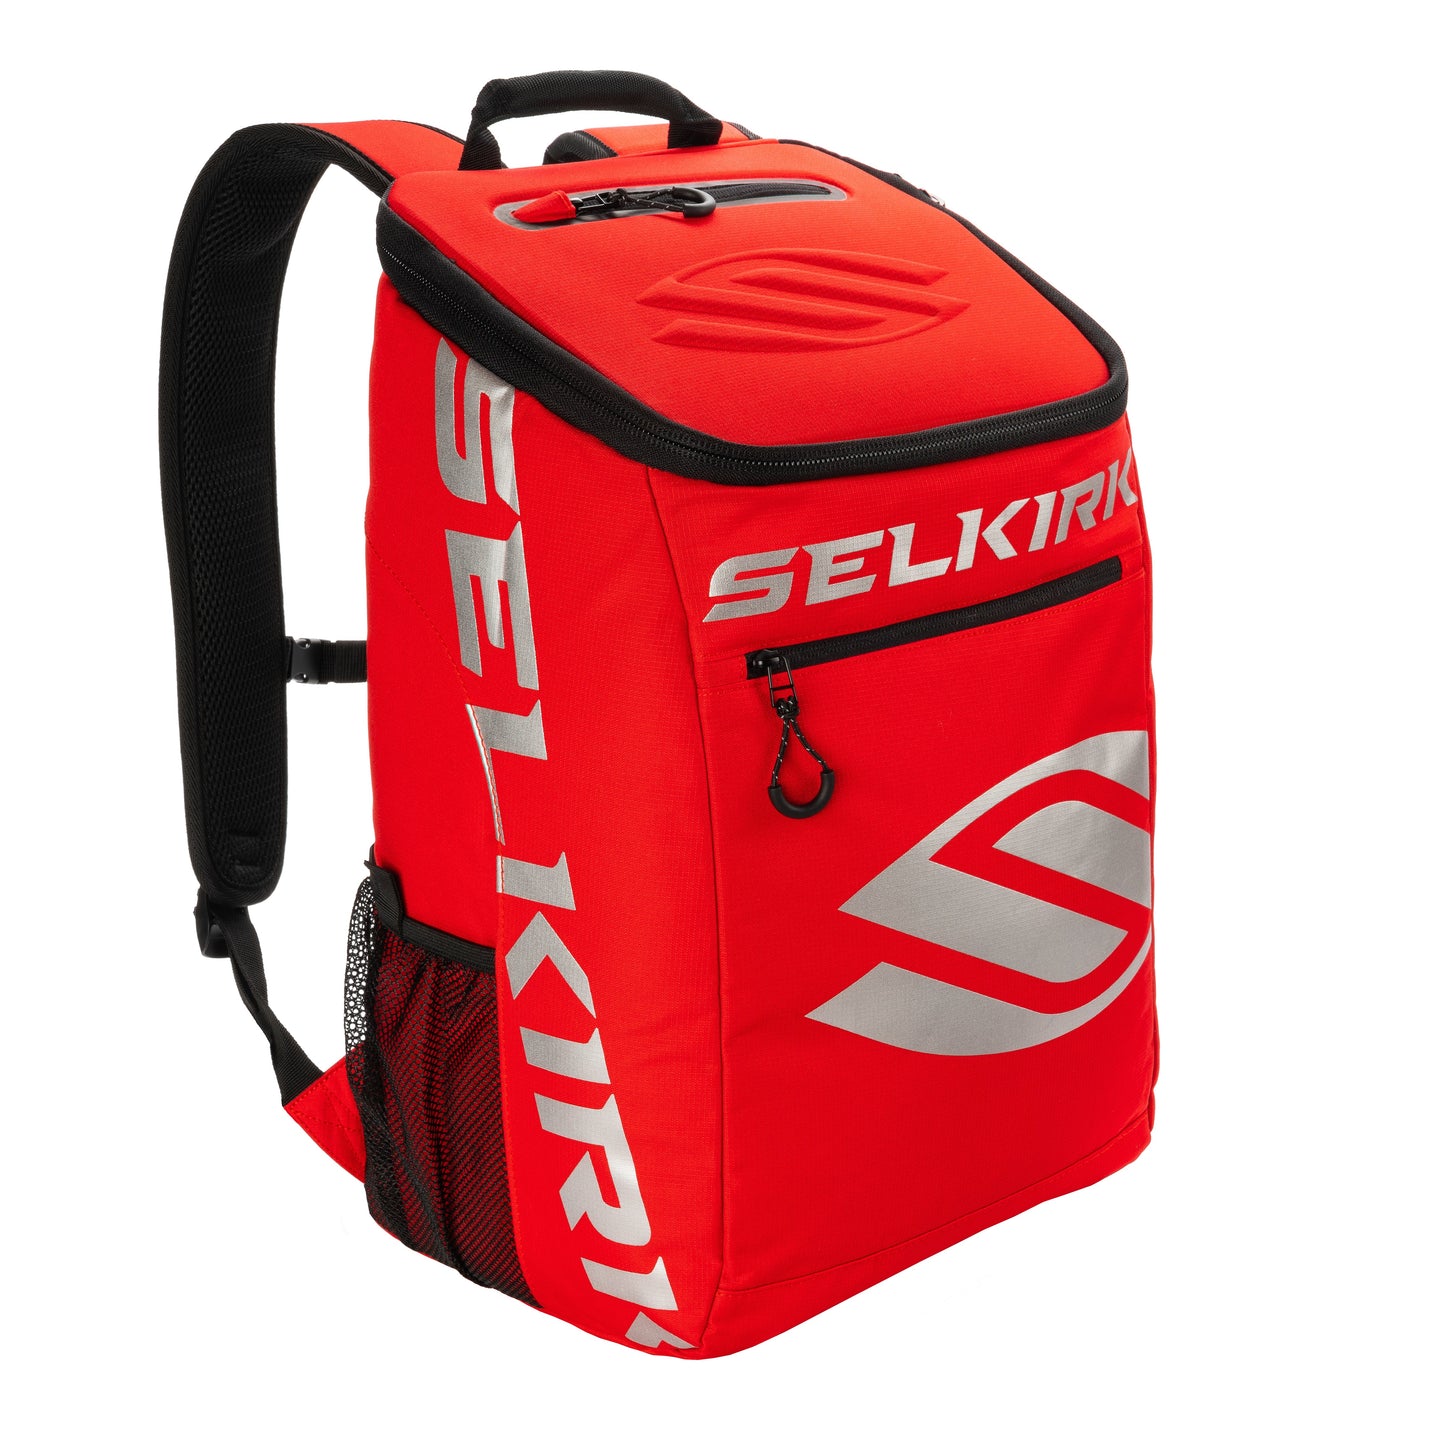 A red backpack with the word Selkirk on it.